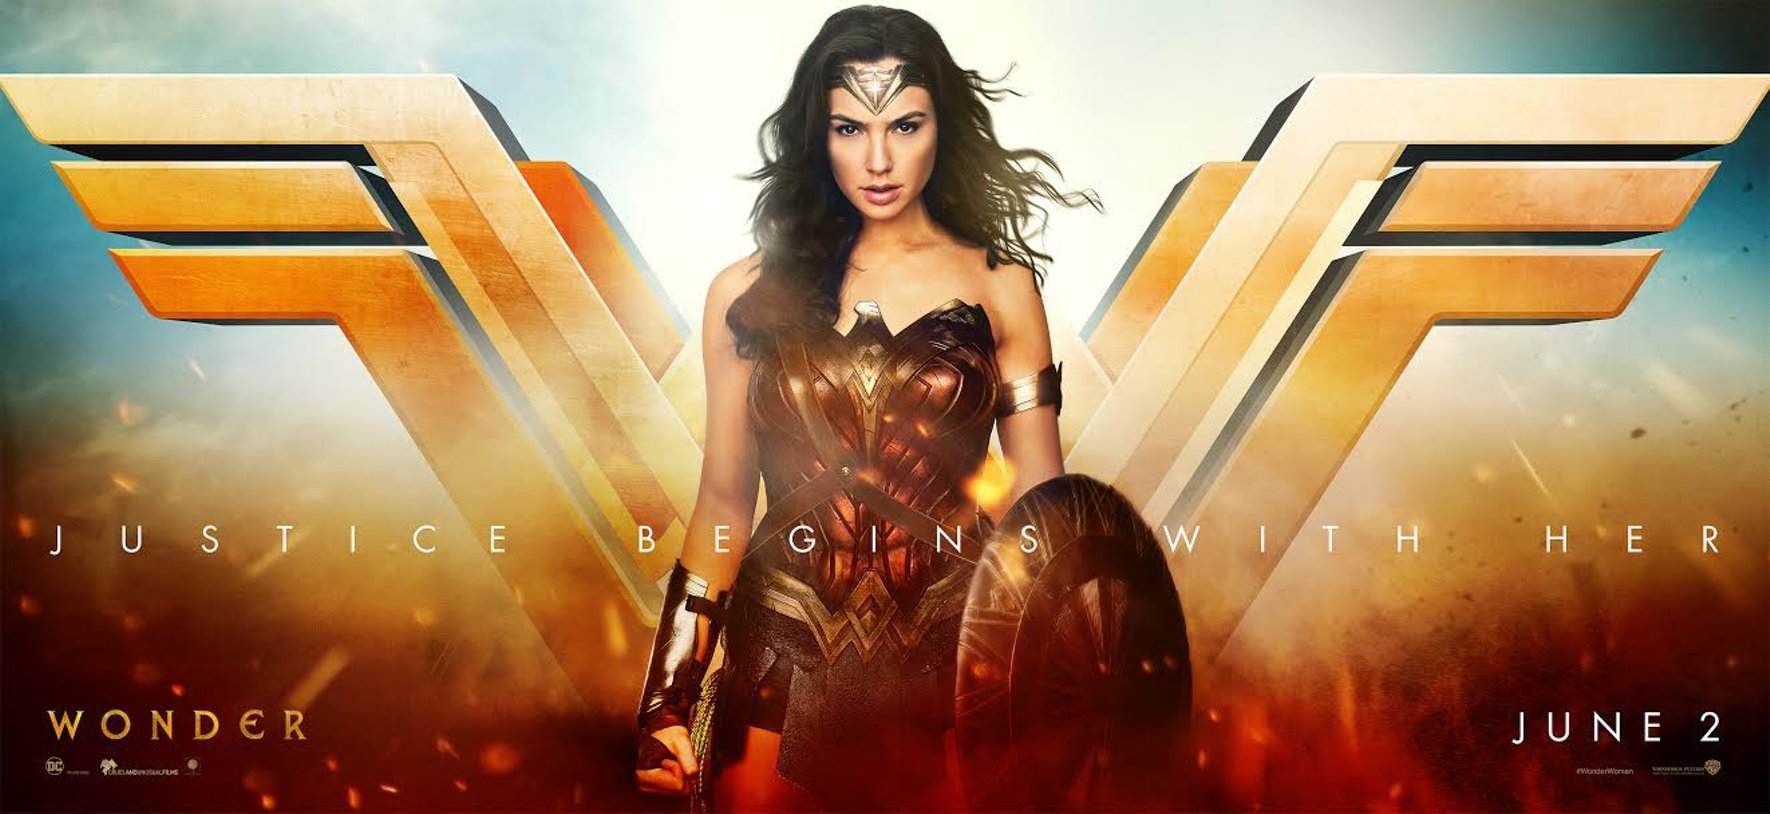 Special Edition – Wonder Woman